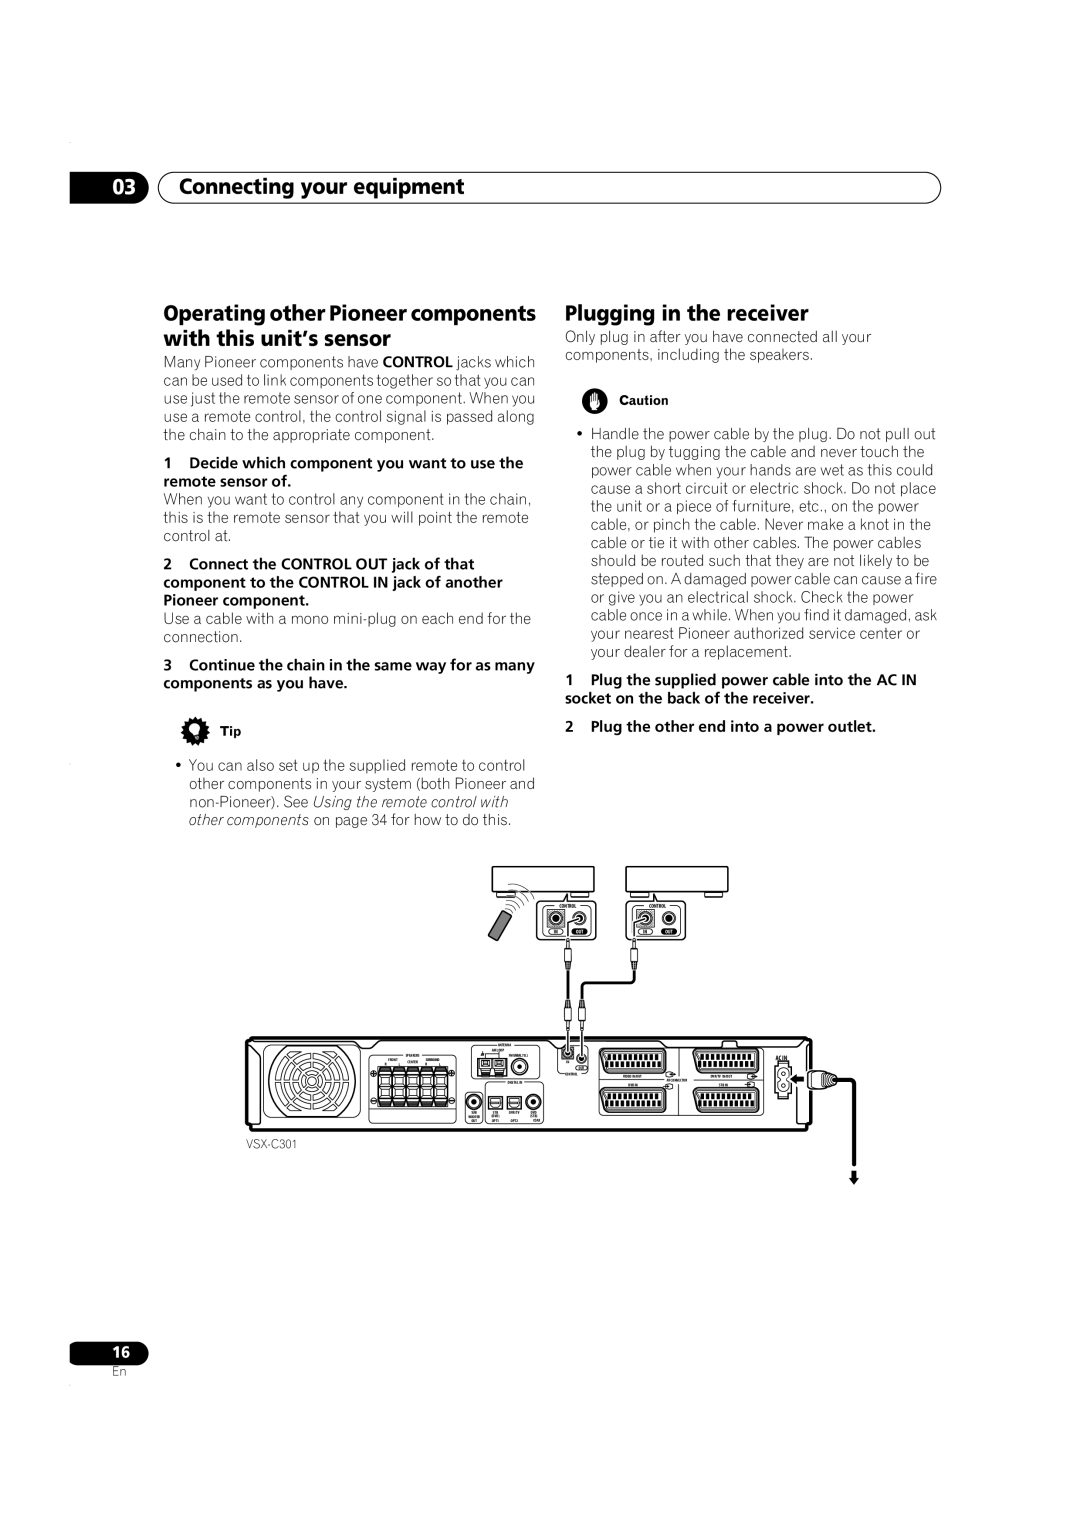 Pioneer VSX-C301 manual Operating other Pioneer components with this unit’s sensor, Plugging in the receiver 